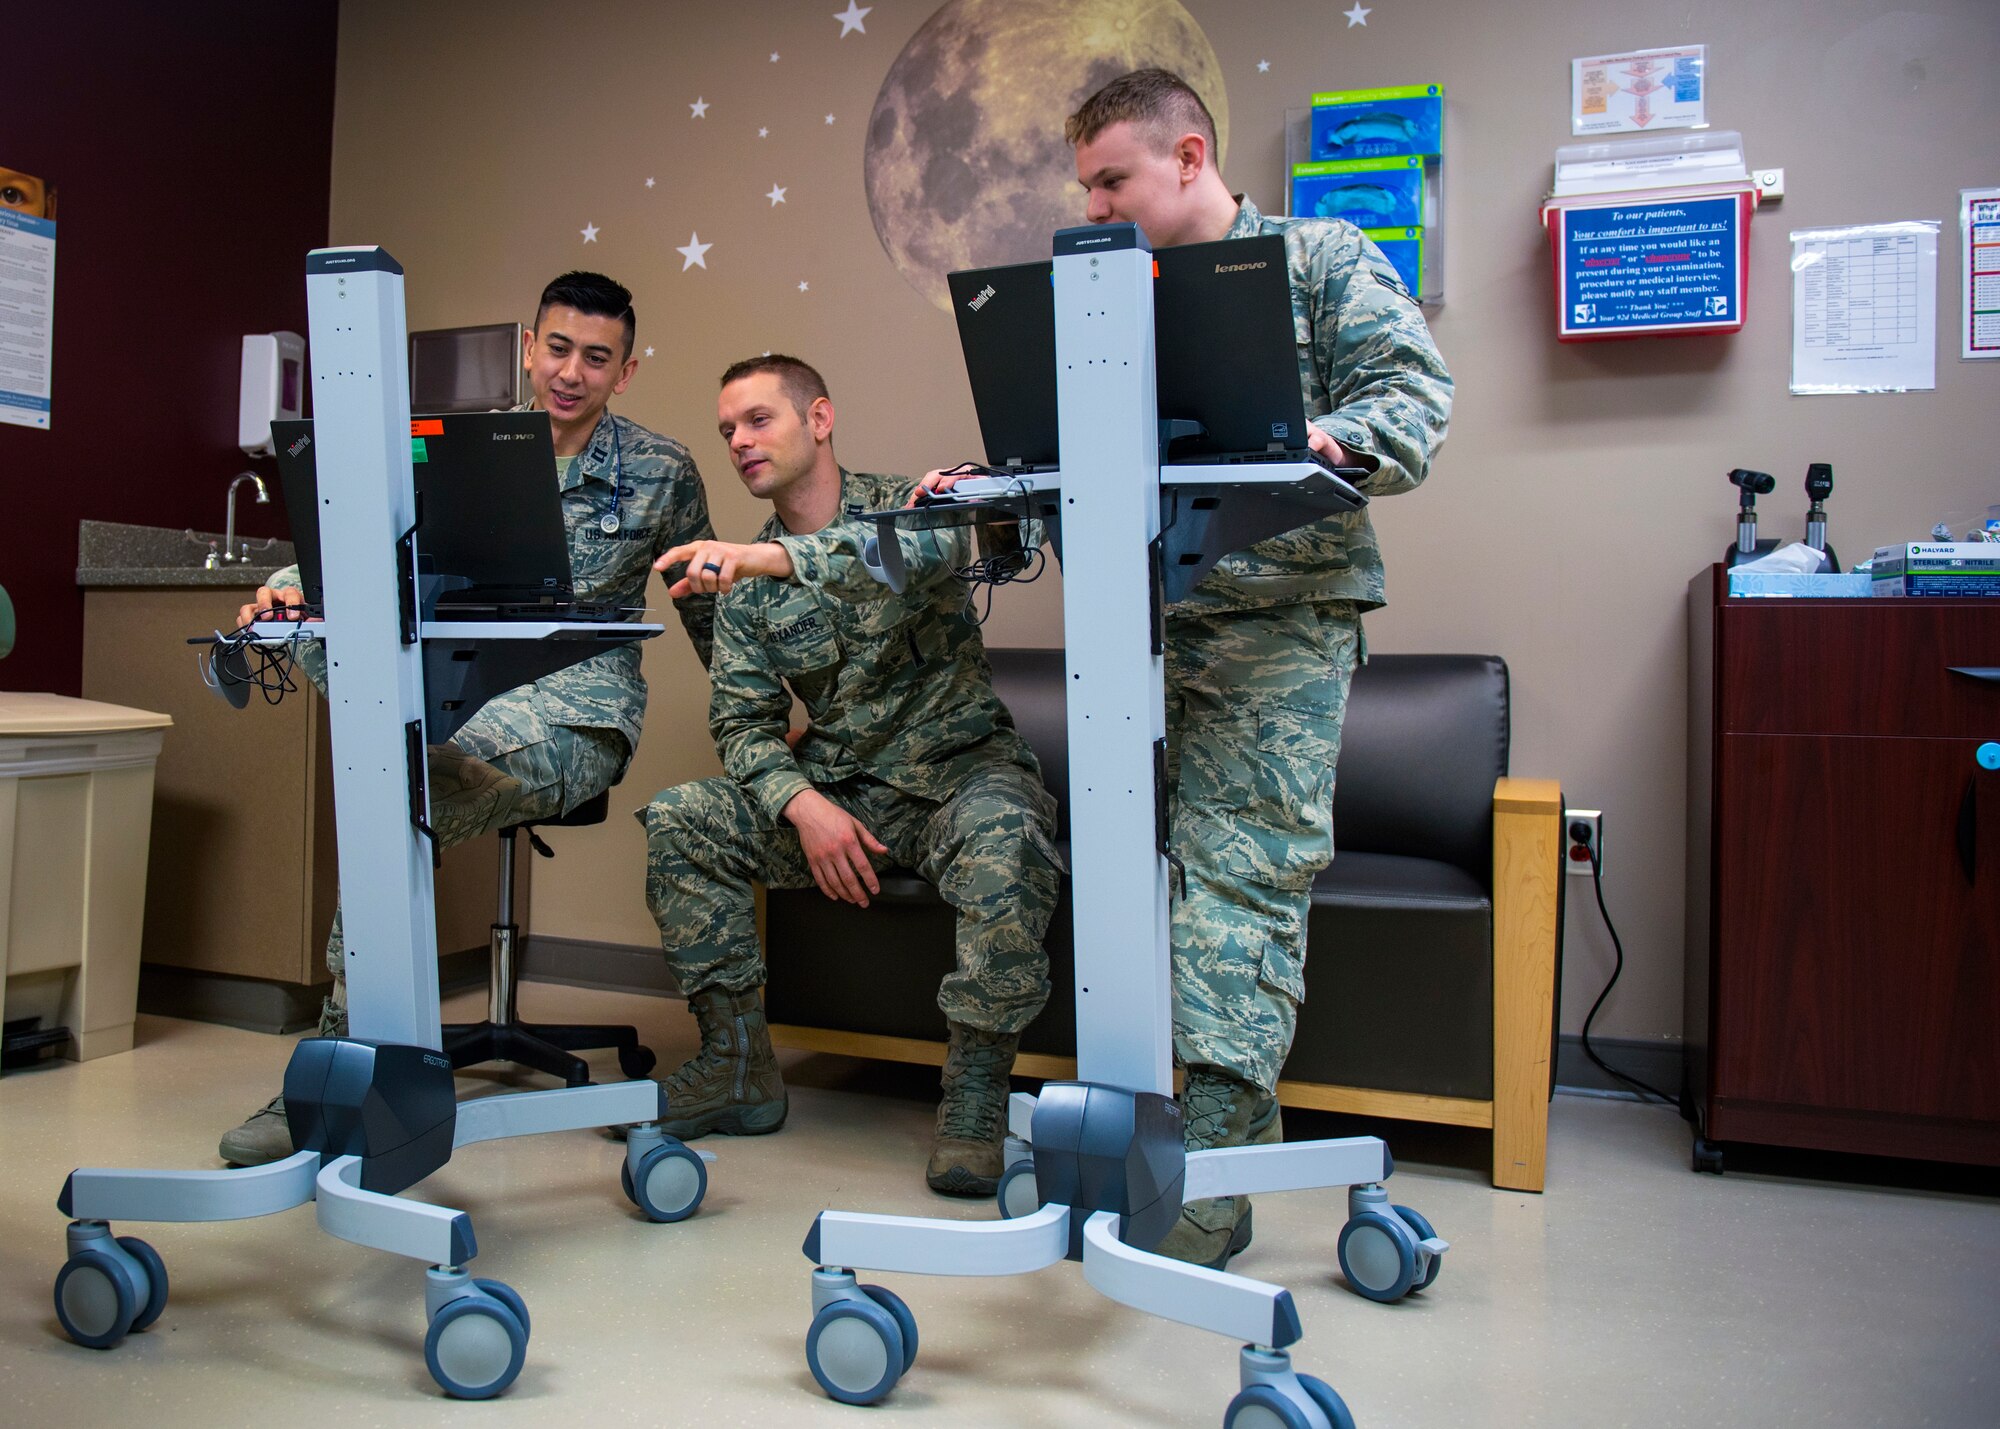 (from left) Capt. Joseph Migliuri, 92nd Medical Group pediatrician, Capt. Neal Alexander, 92nd MDG maternal child flight nurse manager, and Airman 1st Class Levi Brown, 92nd MDG aerospace medical technician, review patient medical records prior to an appointment April 4, 2018, at Fairchild Air Force Base, Washington. The pediatric team has implemented a new concept of operations: rewarding, efficiency, setting priorities and empowering team members, or RESET, to their system of patient care. Virtual appointments are offered to allow patients to receive the care they need from doctors without having to visit the clinic and has also allowed doctors to have more time to see more patients per day (U.S. Air Force photo/Airman 1st Class Whitney Laine)